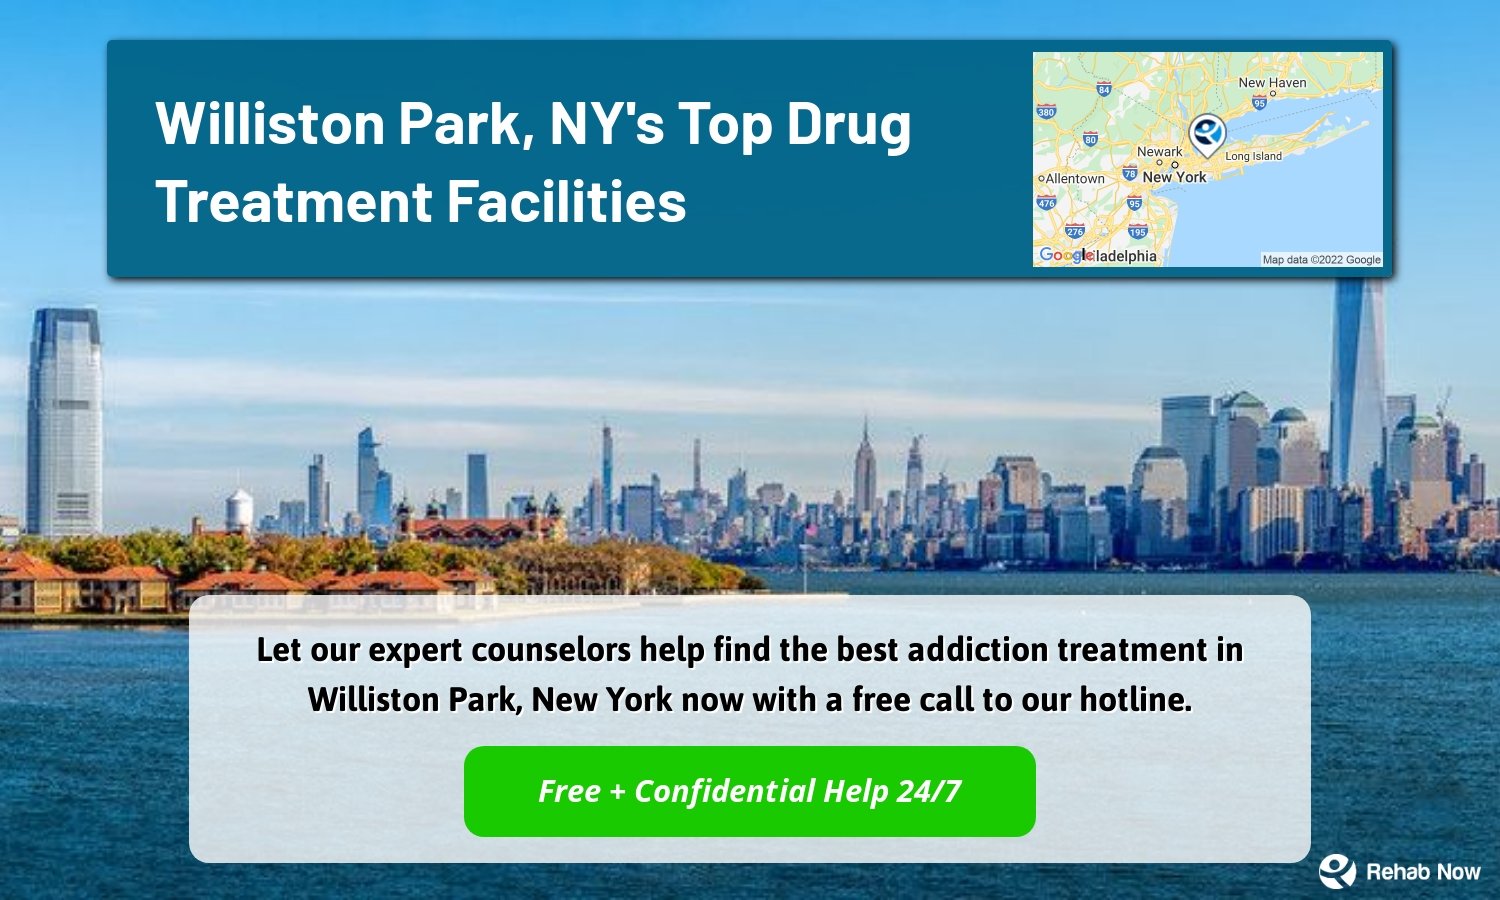 Let our expert counselors help find the best addiction treatment in Williston Park, New York now with a free call to our hotline.